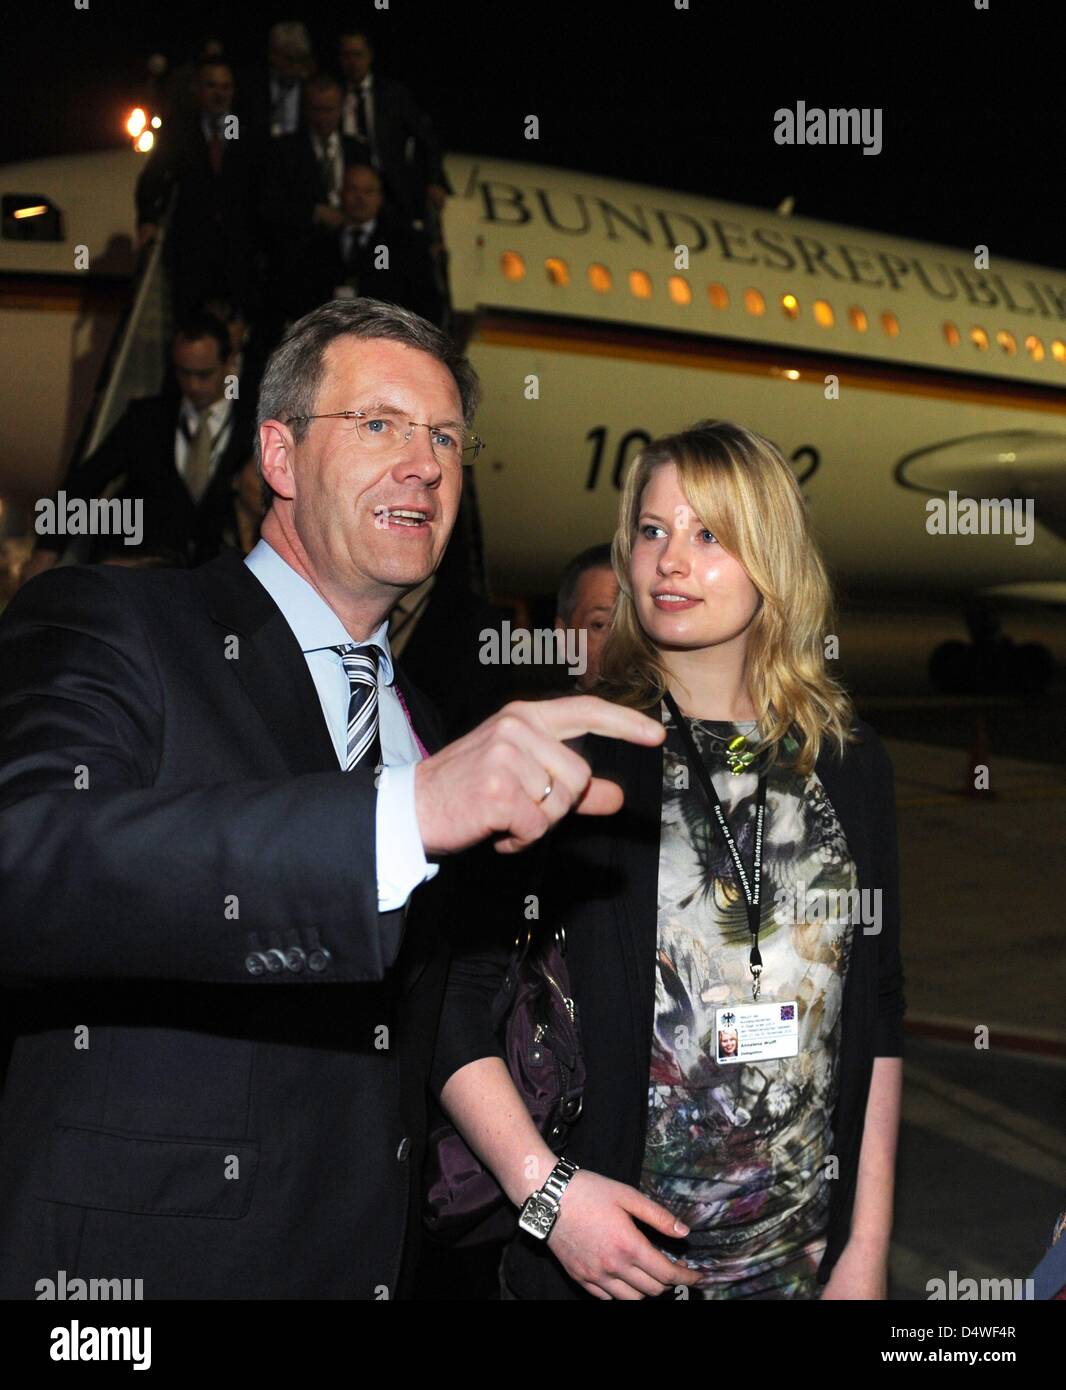 German President Christian Wulff and daughter Annalena are welcomed in Tel Aviv, Israel, 27 November 2010. Wulff's 17-year-old daughter accompanies Mr Wulff on his four-day visit to Israel in stead of his wife Bettina. The choice of travel companion is supposed to symbolize the importance of transmitting the memory of the Holocaust to younger generations. Photo: RAINER JENSEN Stock Photo